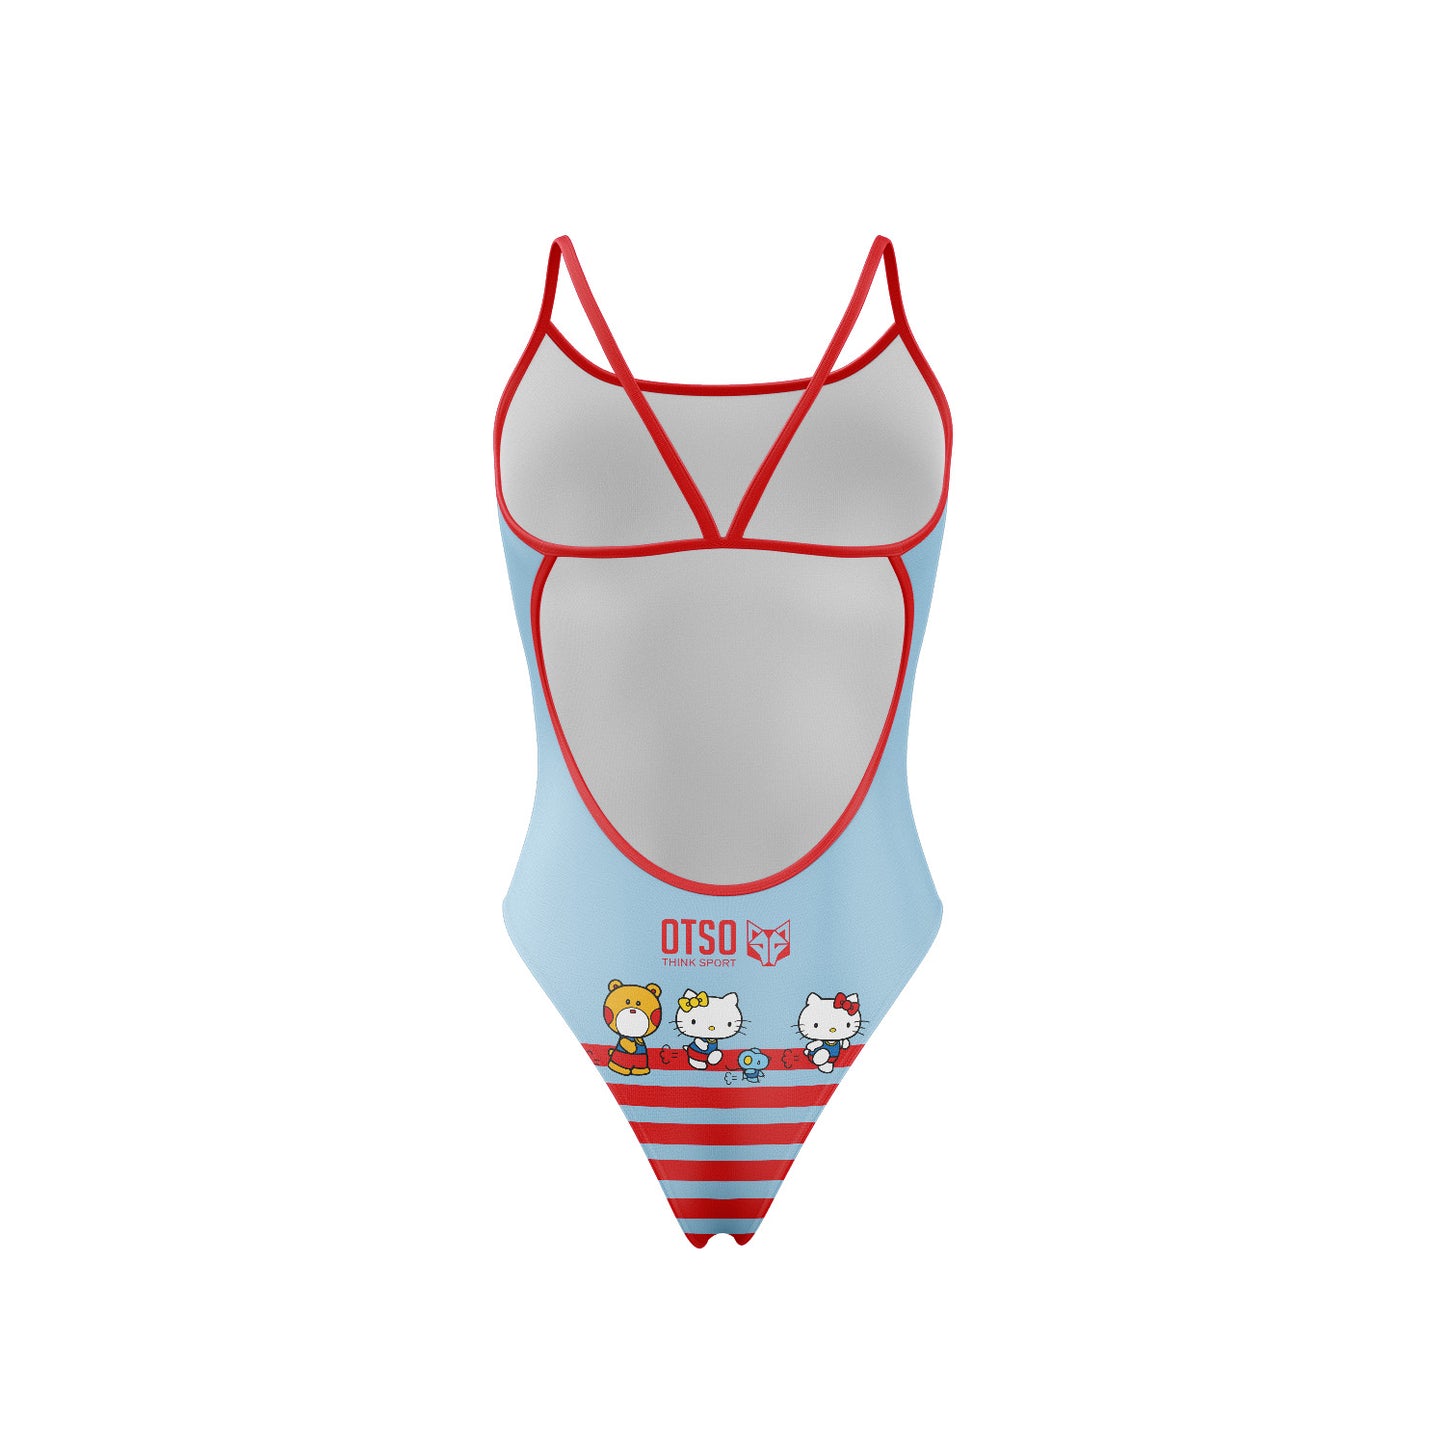 Girls and women's swimsuit - Hello Kitty Stripes